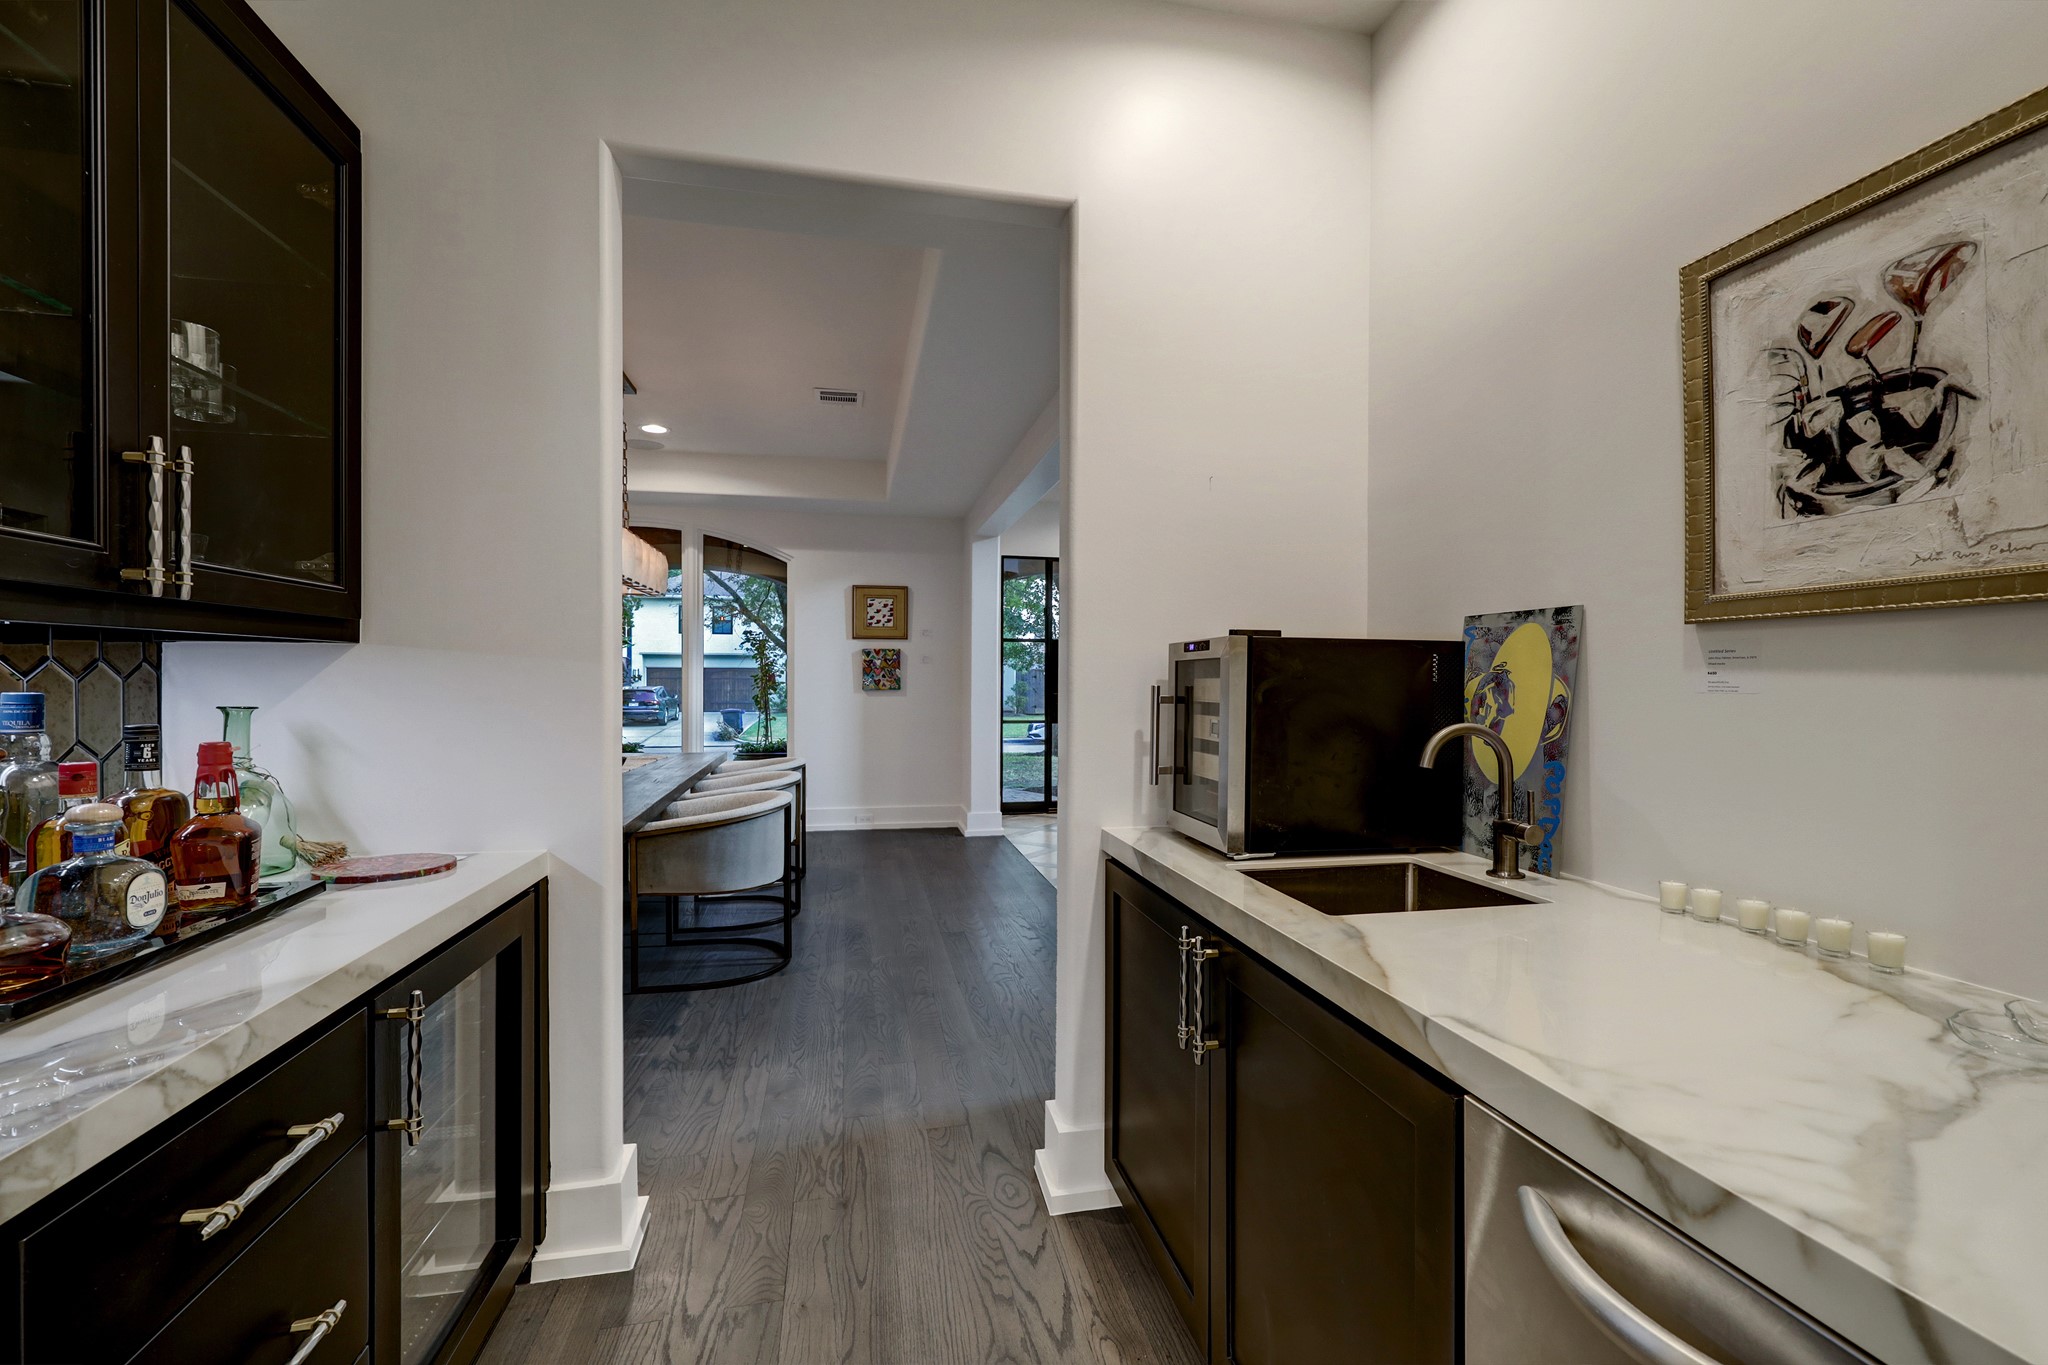 Between the dining room and the kitchen you'll find this amazing space for all your bar ware and storage. Featuring wet sink, wine fridge and glass front cabinets for storage. High quality hardware is throughout the home.